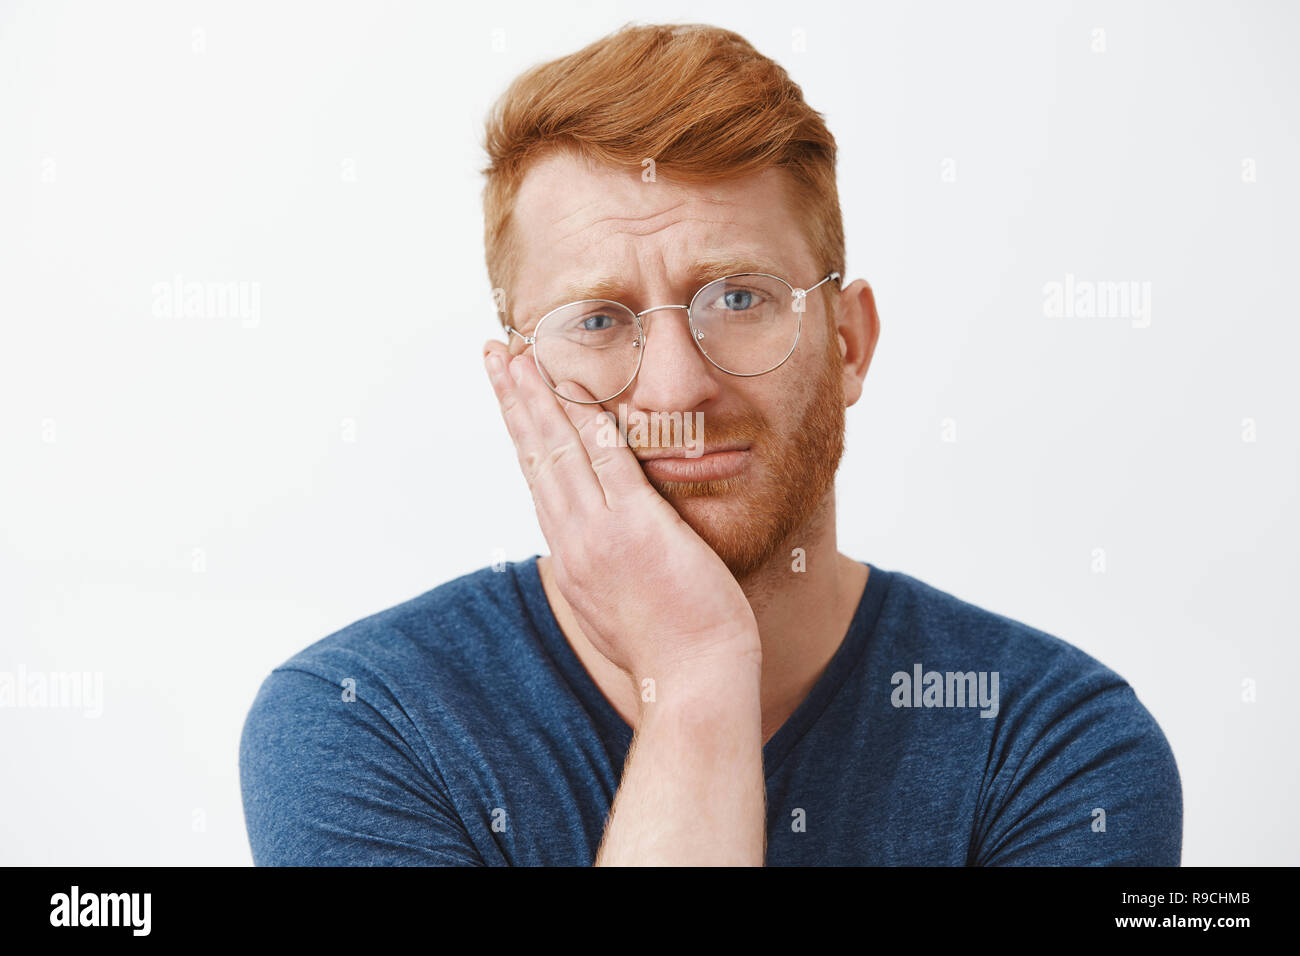 Headshot of upset and gloomy redhead guy with beard in transparent glasses, frowning holding palm on cheek gazing with regret and disappointment, losing chance over gray background Stock Photo